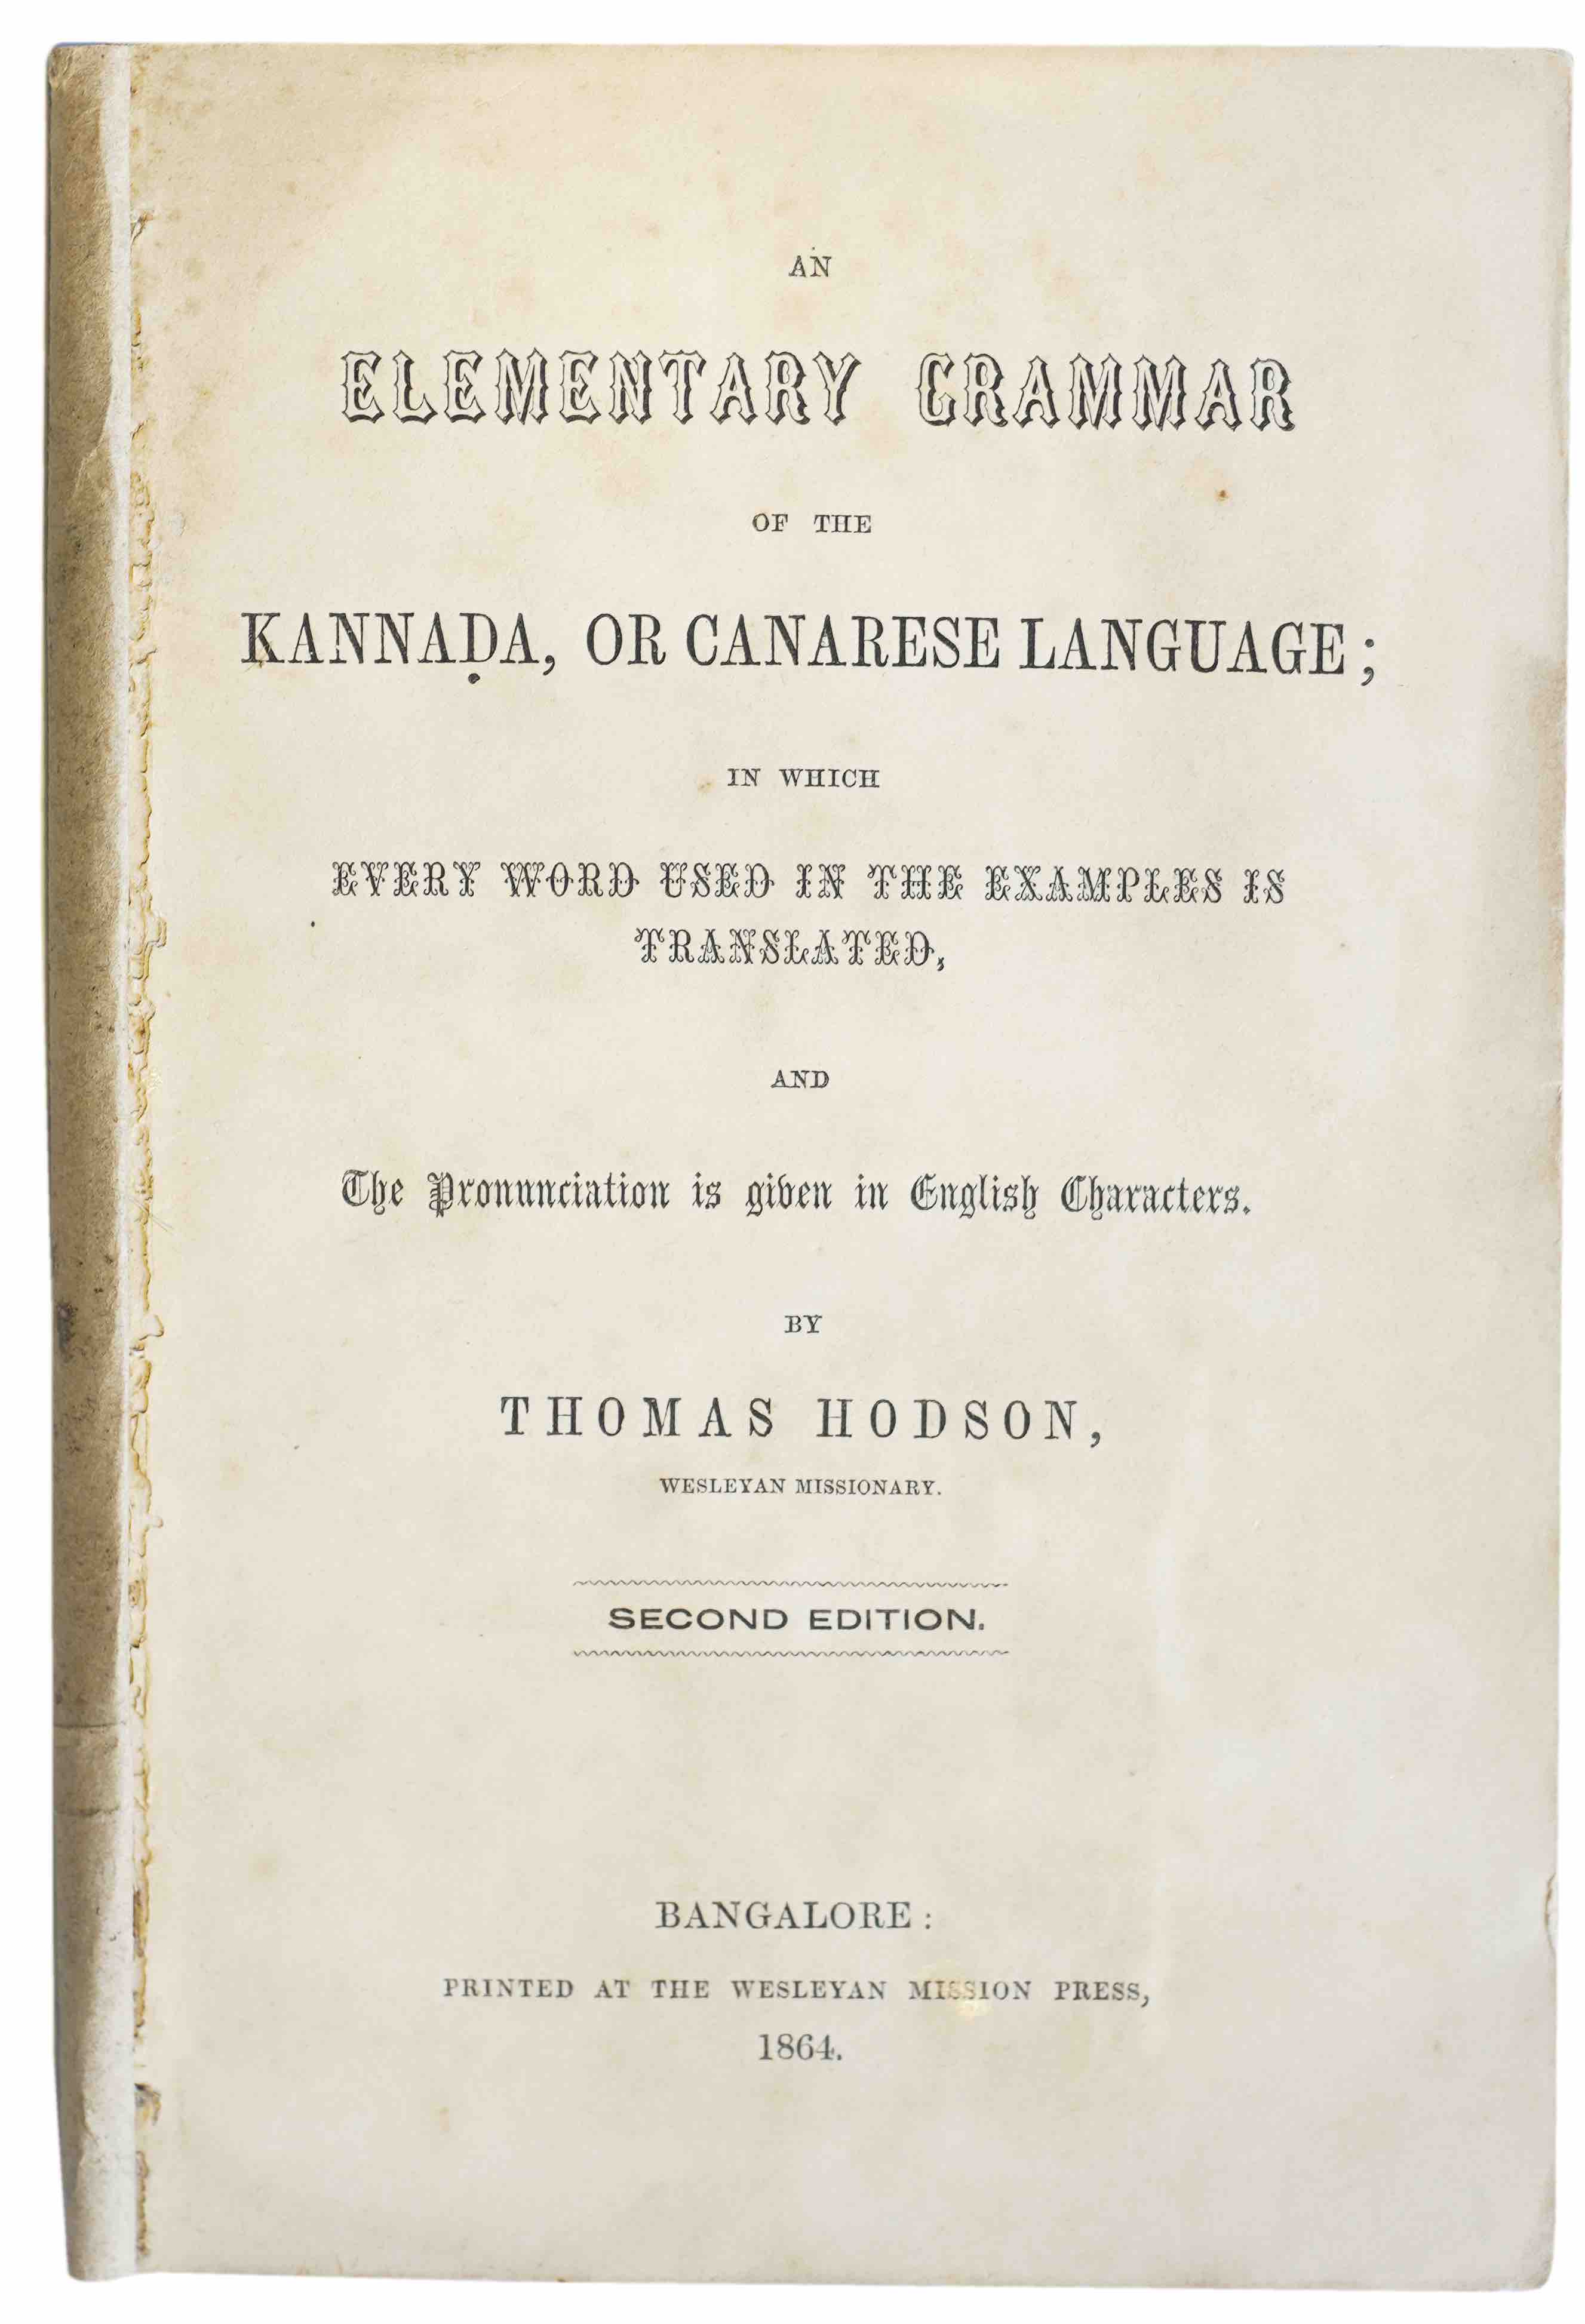 HODSON, THOMAS: - An Elementary Grammar of the Kannada, or Canarese Language; in which every word used in the examples is translated, and a pronunciation is given in English Characters. Bangalore, the Wesleyan Mission Press, 1864.